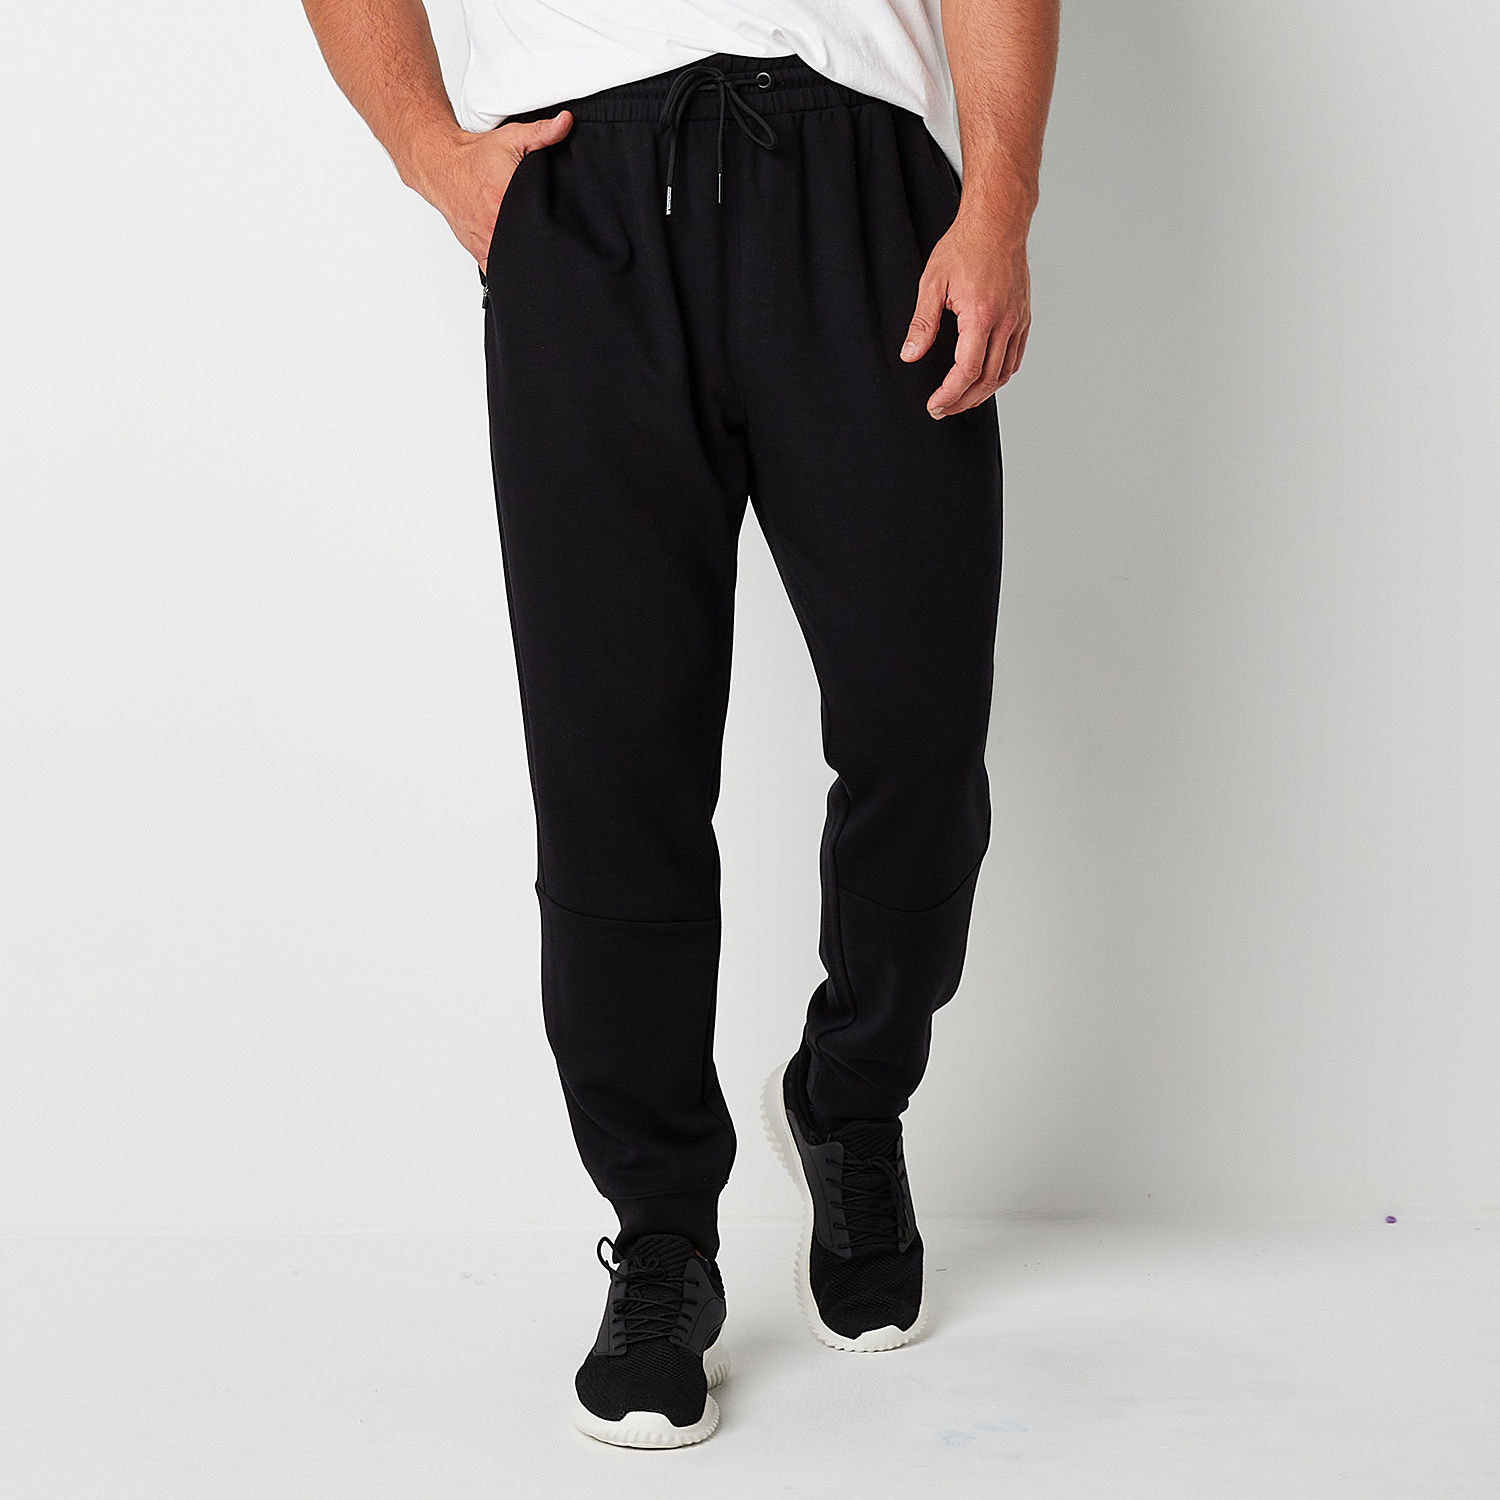 Sports Illustrated Scuba Mens Mid Rise Big and Tall Jogger Pant - JCPenney